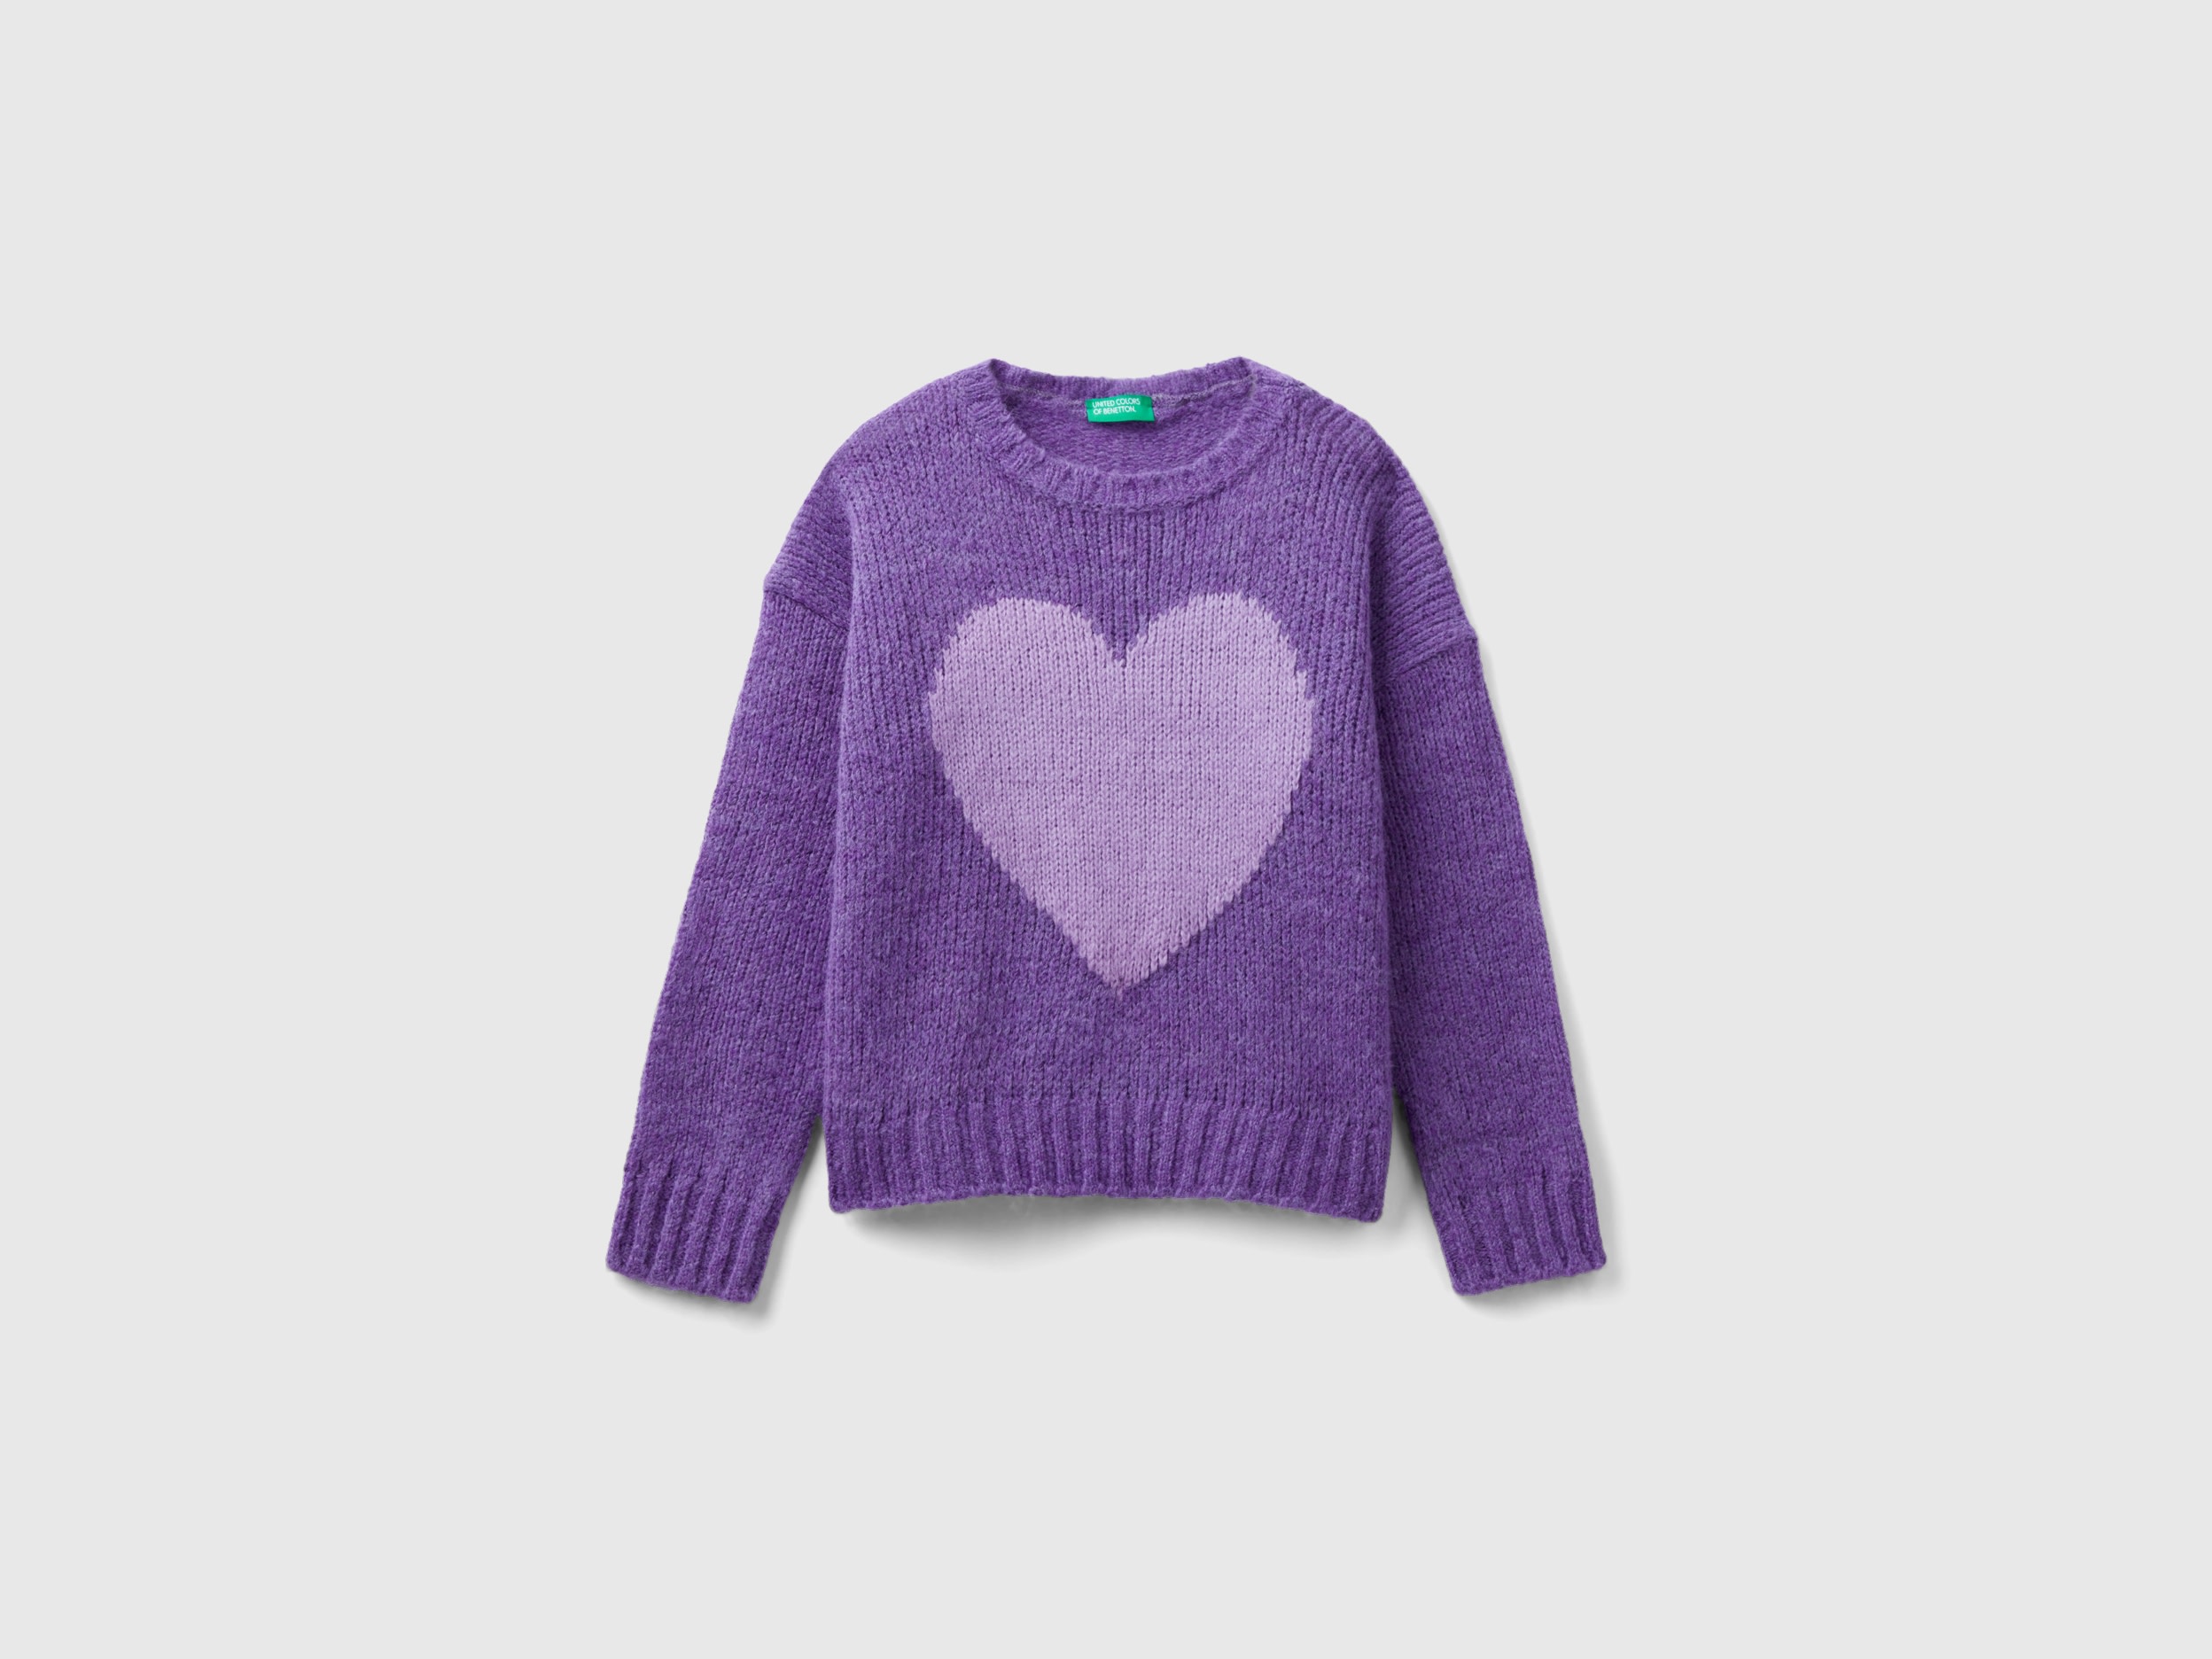 Benetton, Sweater With Heart Inlay, size XL, Violet, Kids